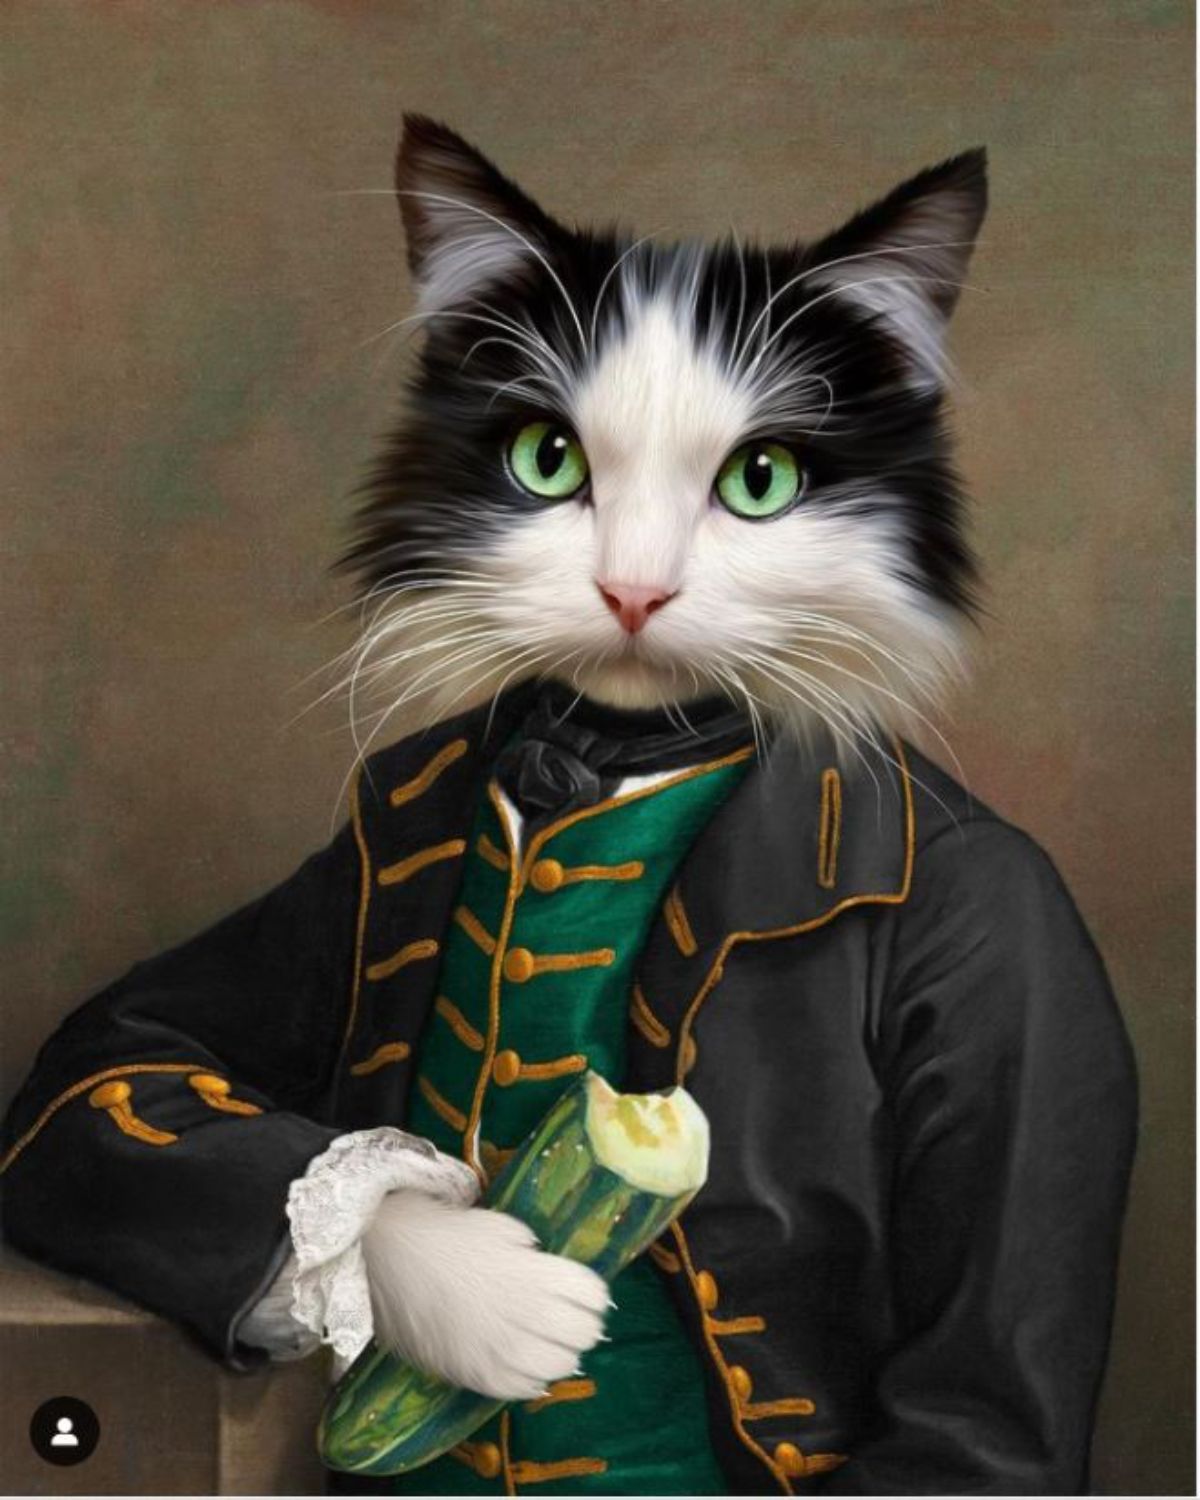 portrait of a black and white fluffy cat in a black coat with gold buttons and green waistcoat with gold buttons holding a cucumber